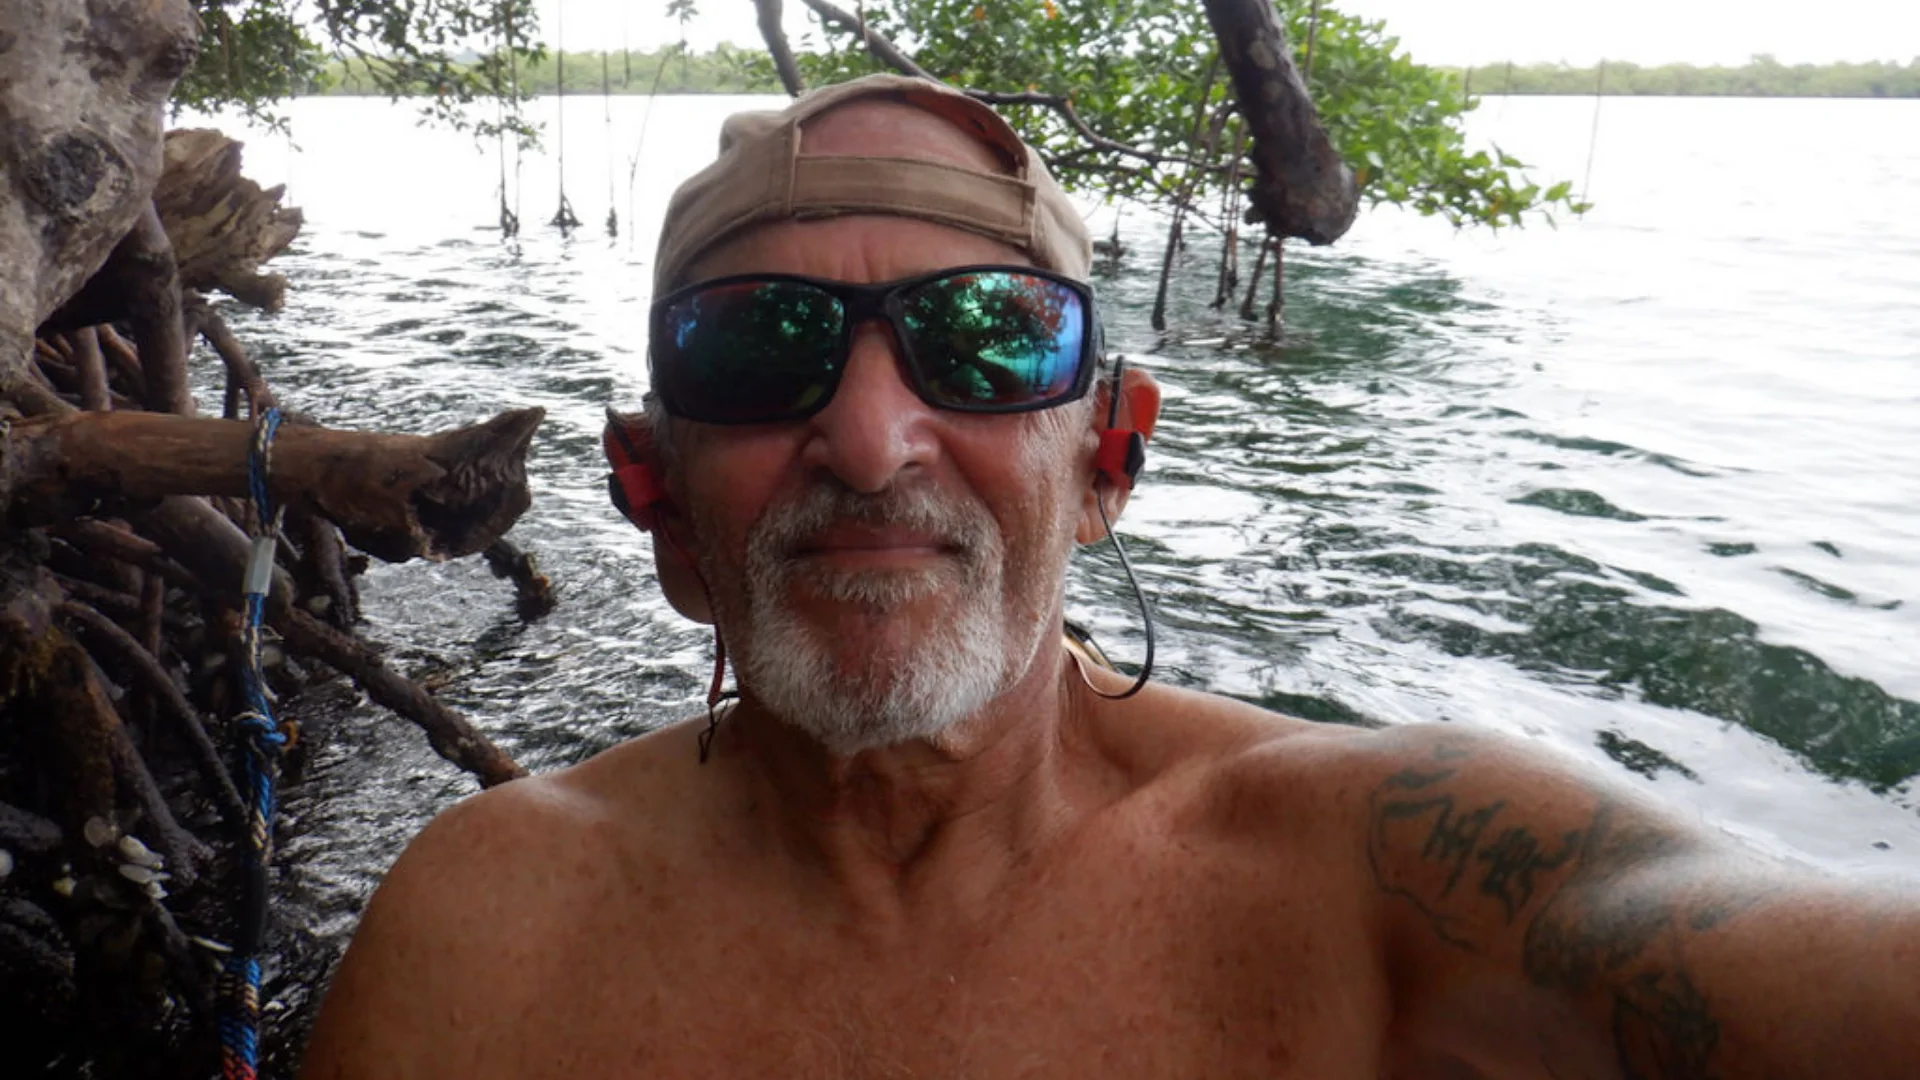 The author, Dennis, takes a close-up selfie alongside the water